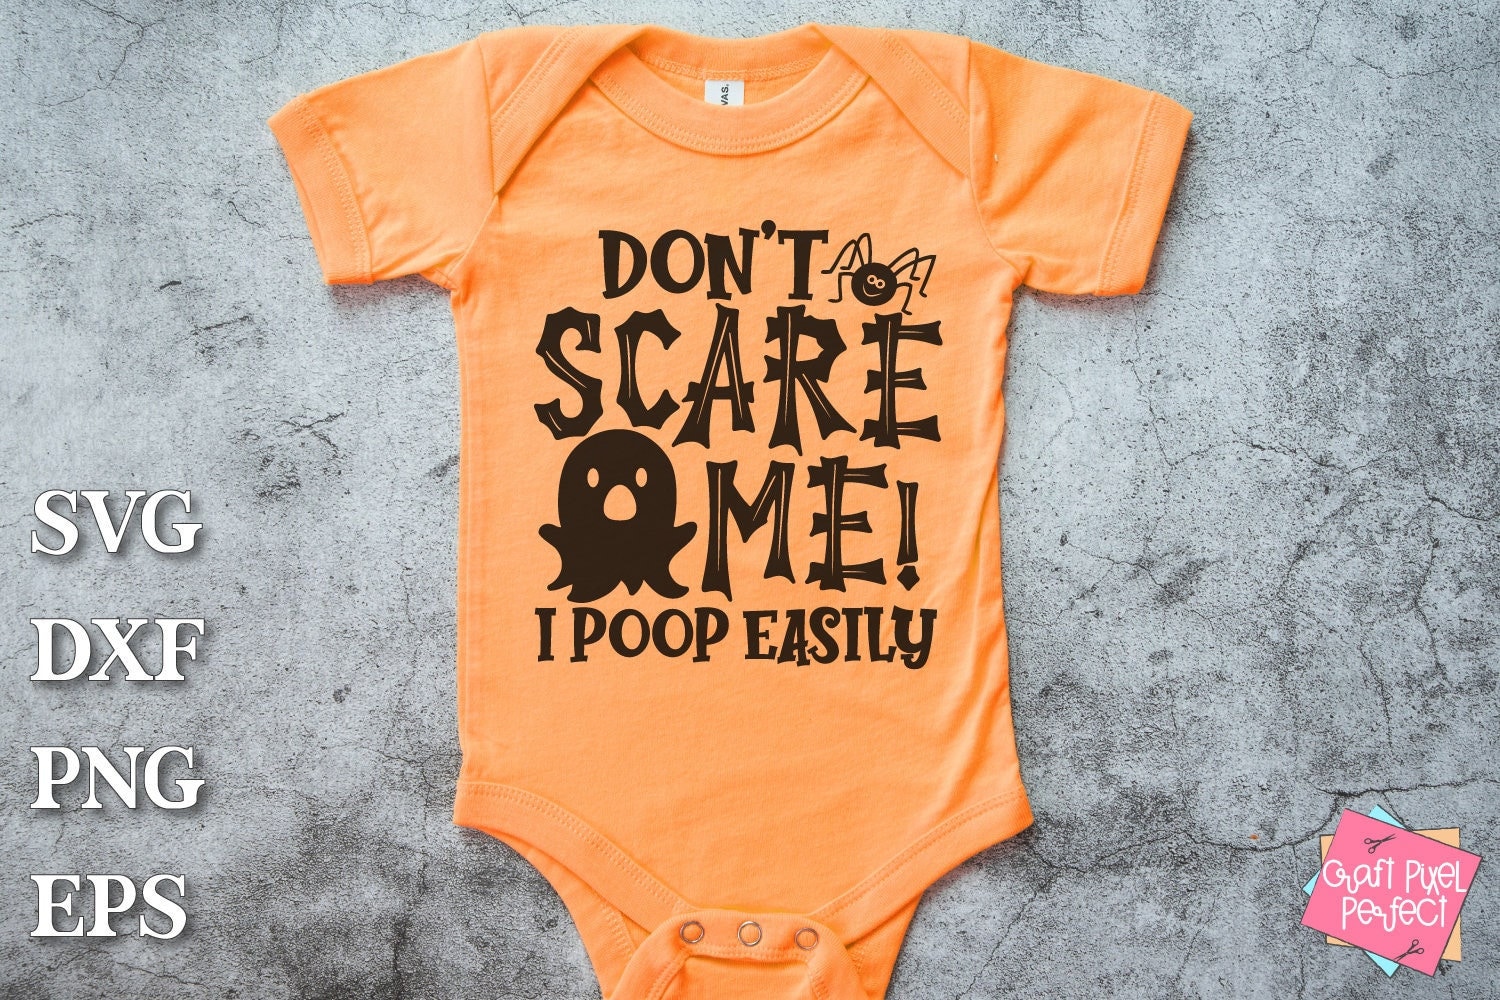 PIMP Poop in My Pants Funny Baby One Piece Funny Gift Body Suit Gifts  Graphic Infant Clothing Baby Shower Gift Short Sleeve Bodysuit 